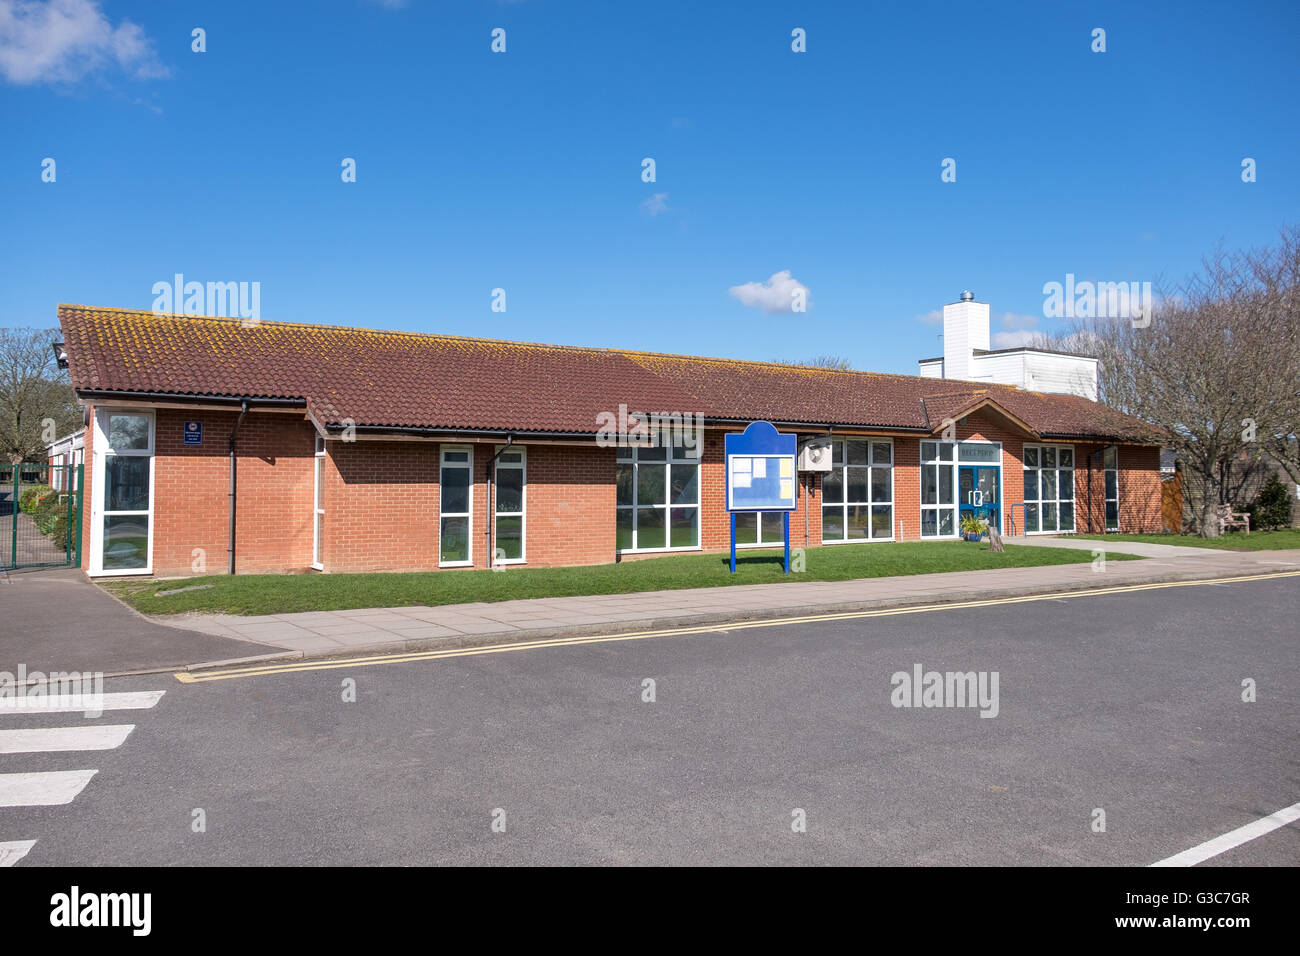 School building in UK, this type of school is for infant/junior children aged 5-11years old Stock Photo